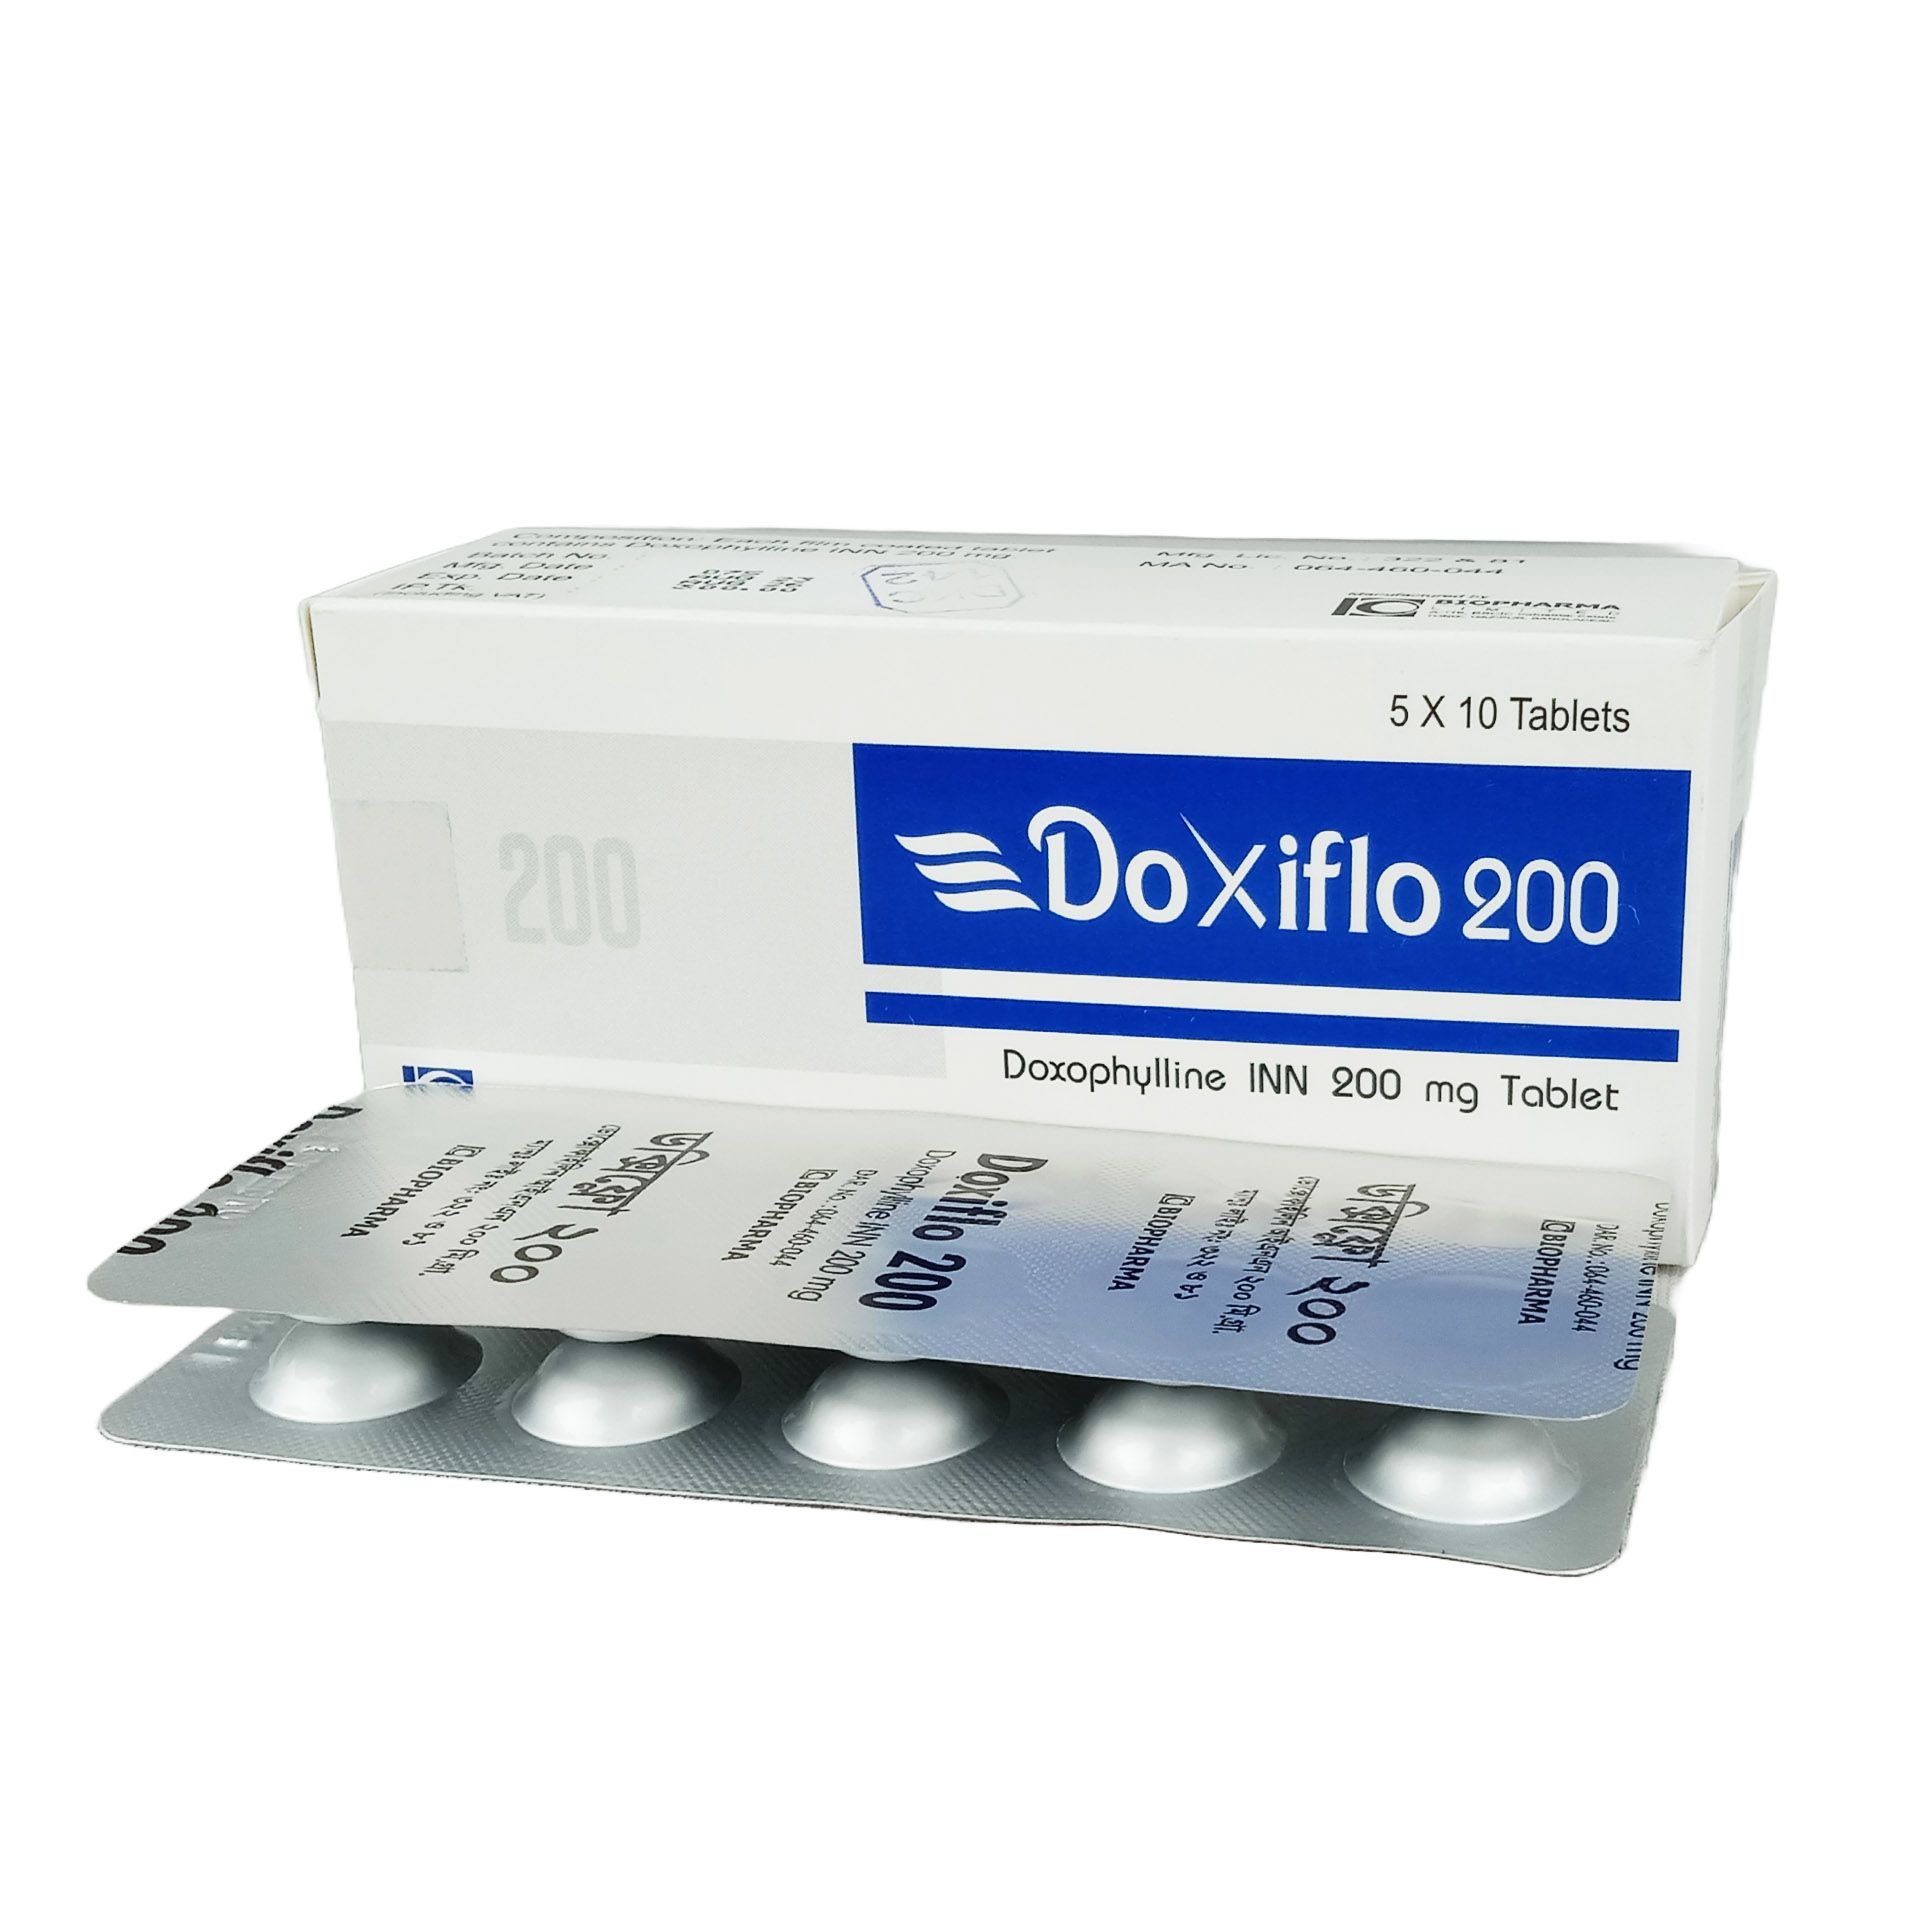 Doxiflo 200mg Tablet